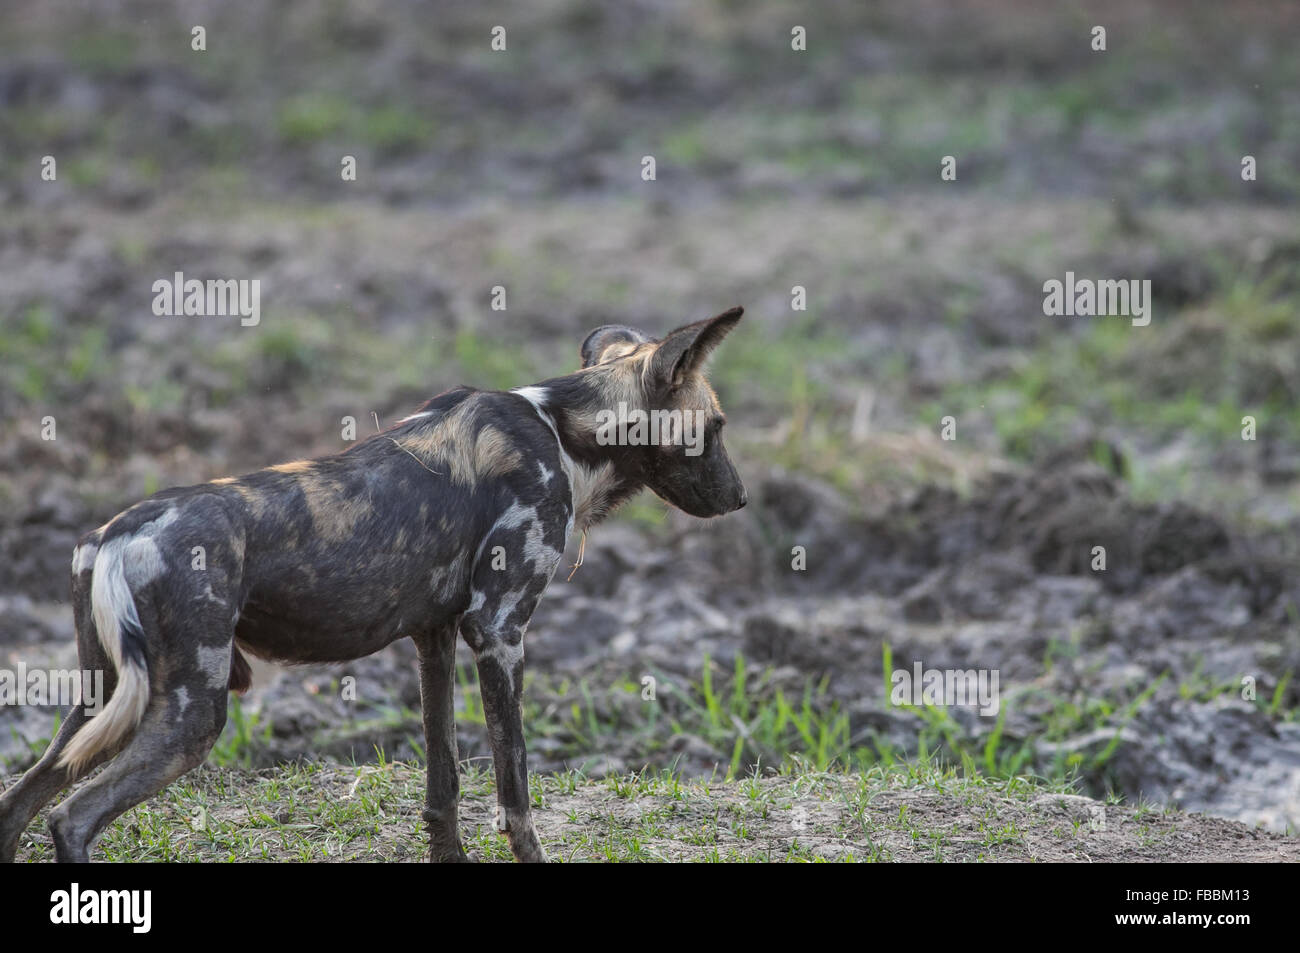 An African wild dog (Lycaon pictus), South Luangwa National Park, Zambia, Africa Stock Photo